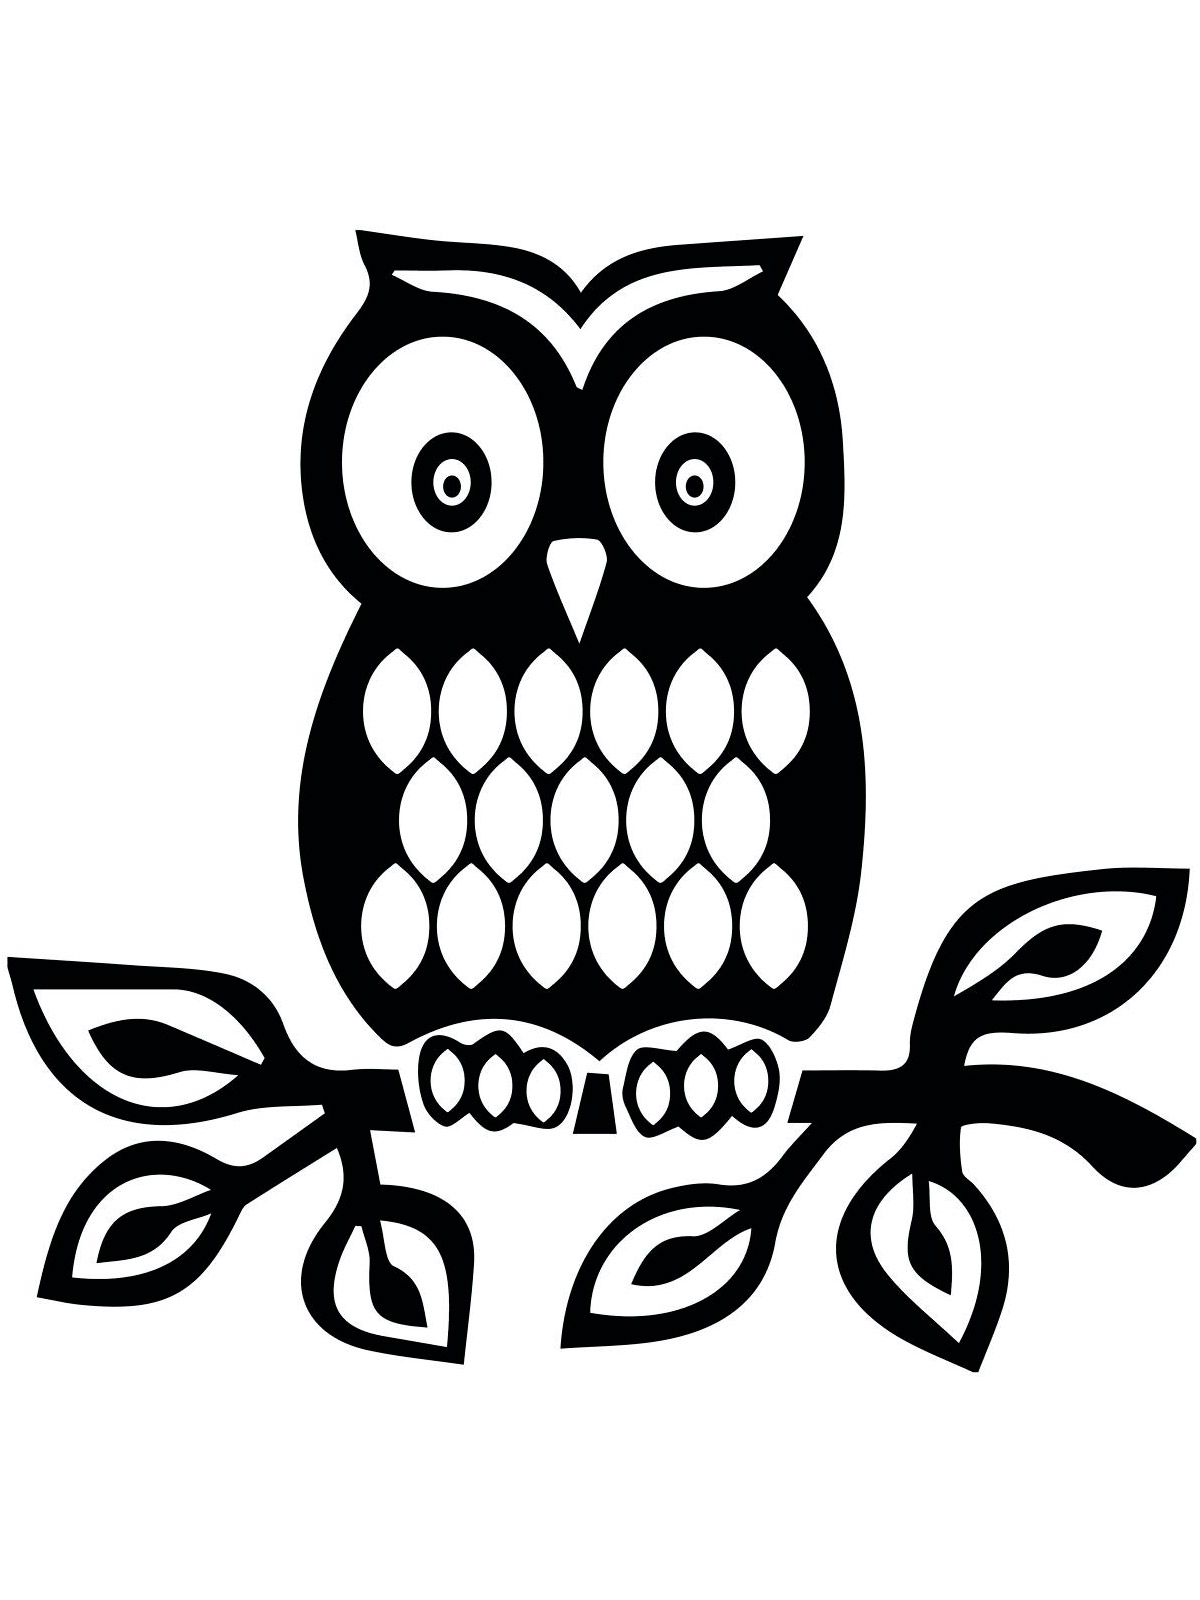 Free Printable Owl Stencils And Templates